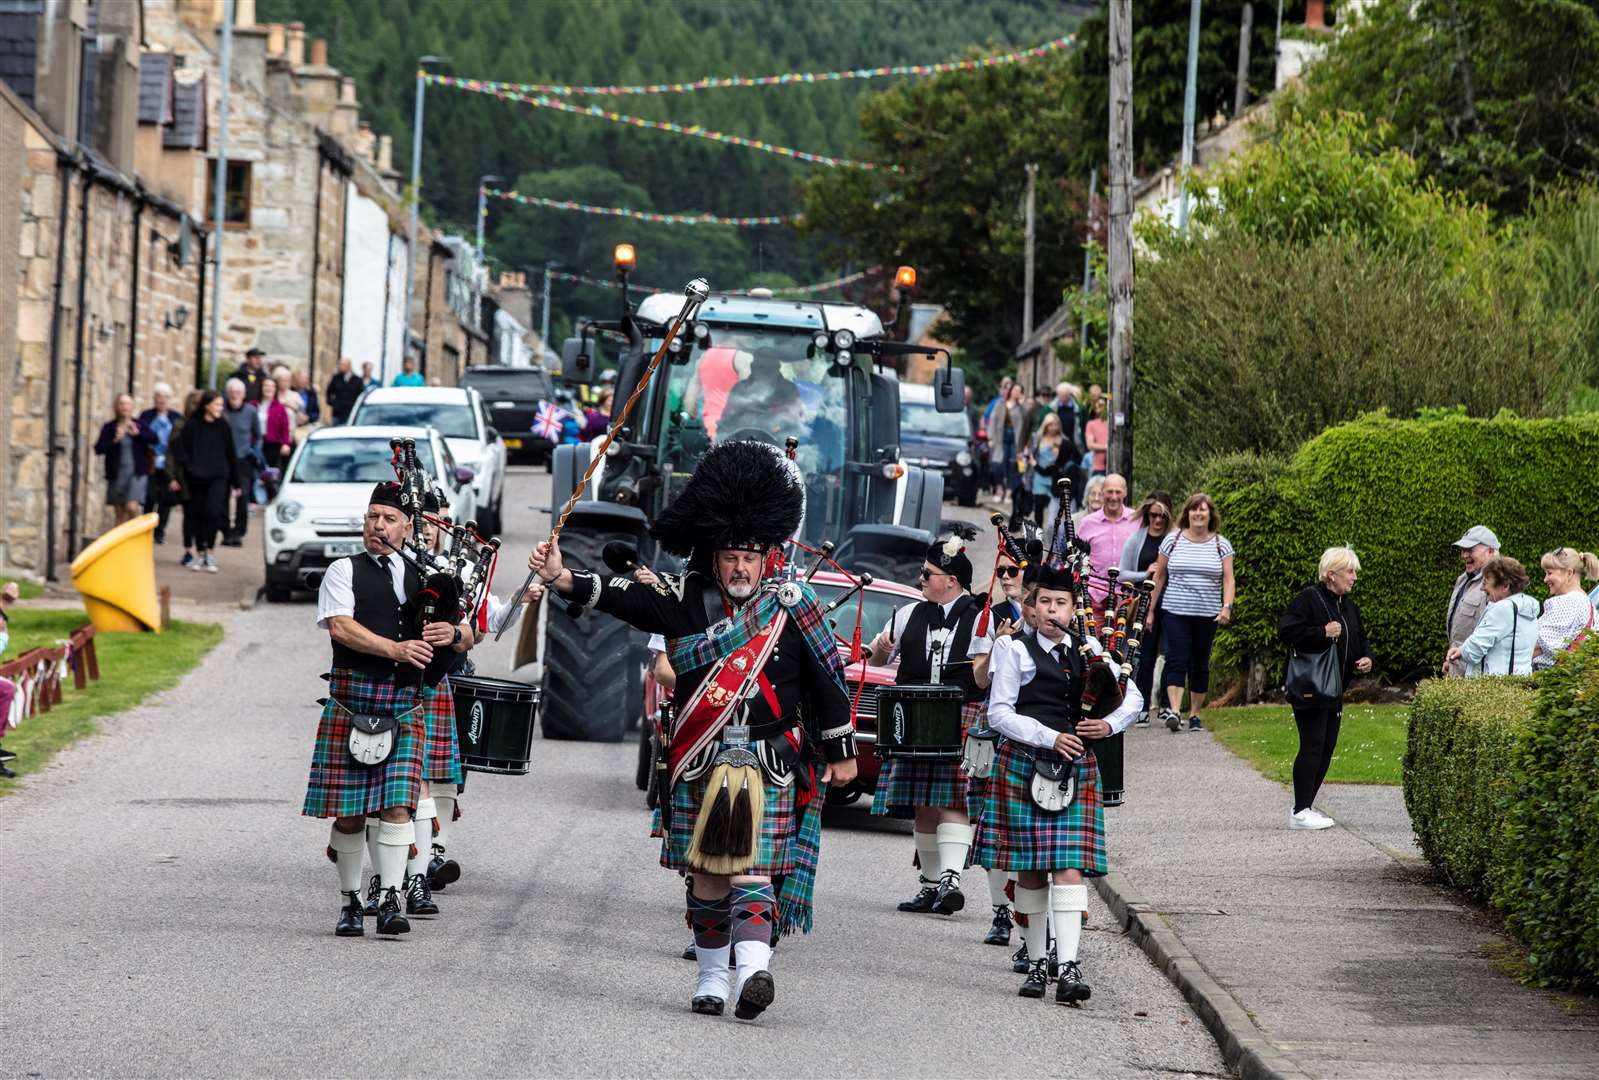 Strathisla Pipe Band led the parade from the Dallas Town Hall to the playing fields. Picture: Nick Gibbons